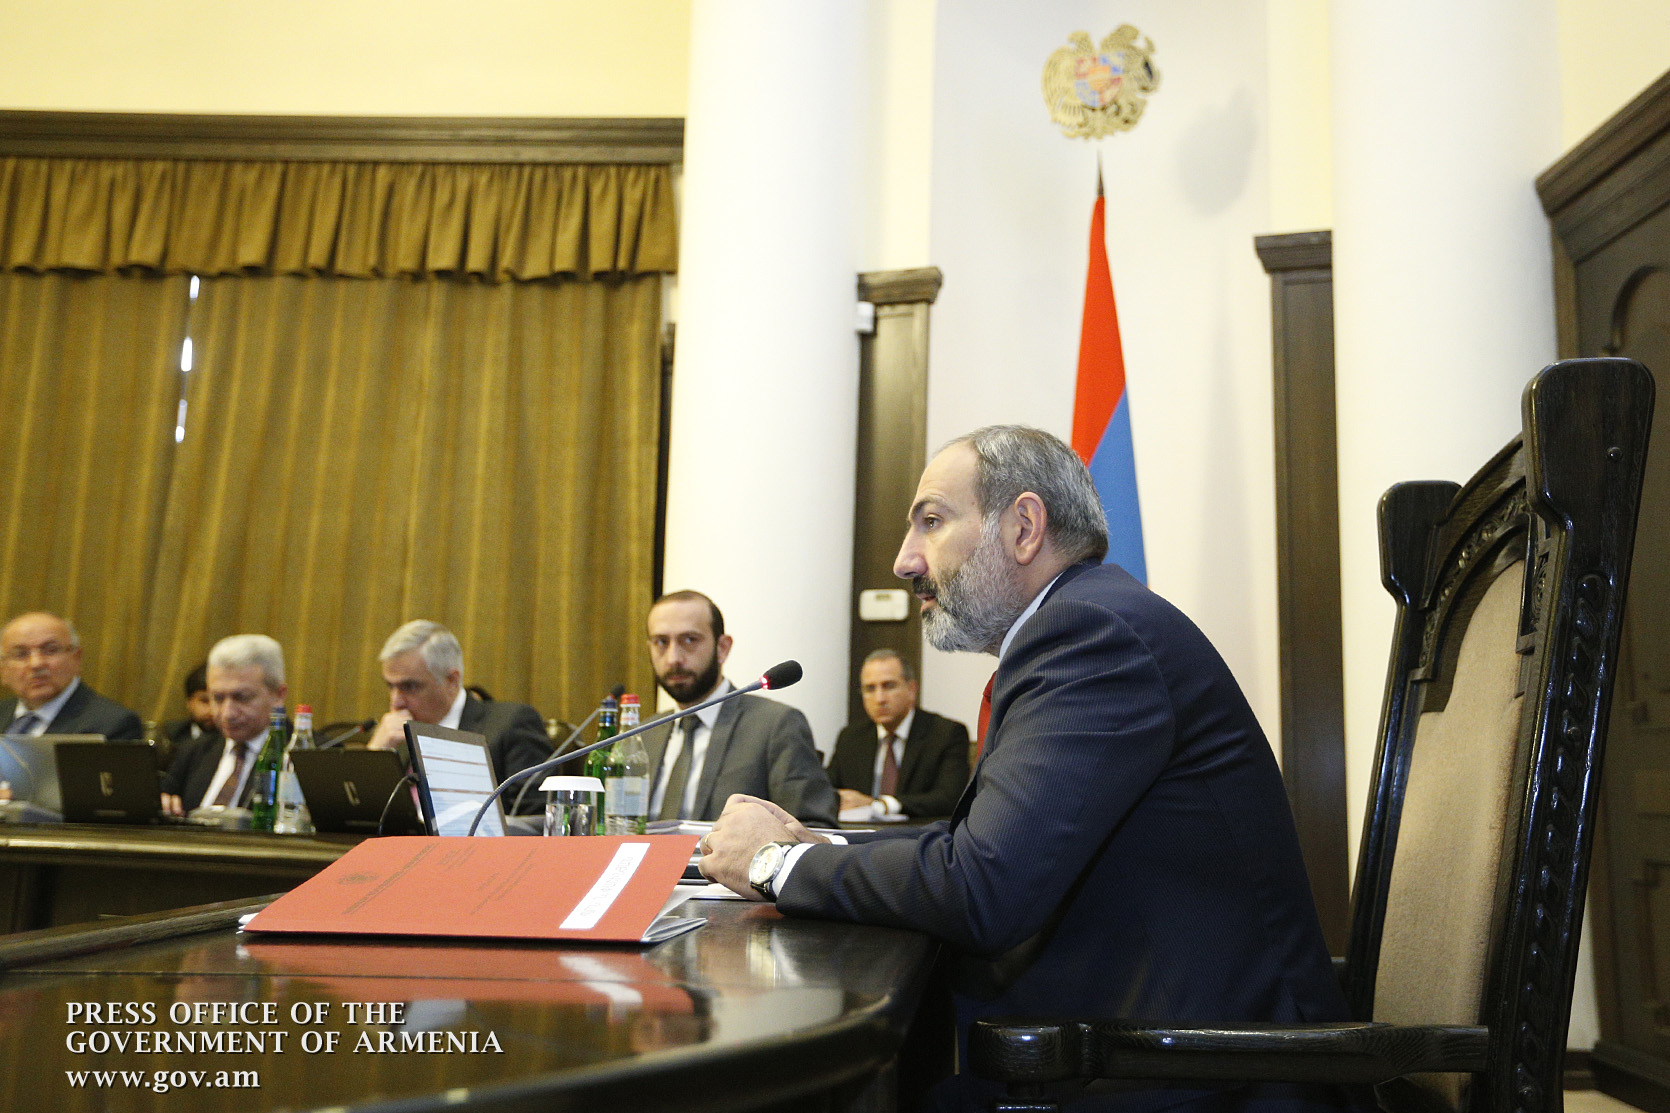 Nikol Pashinyan: ‘We must hold elections in line with best international standards’